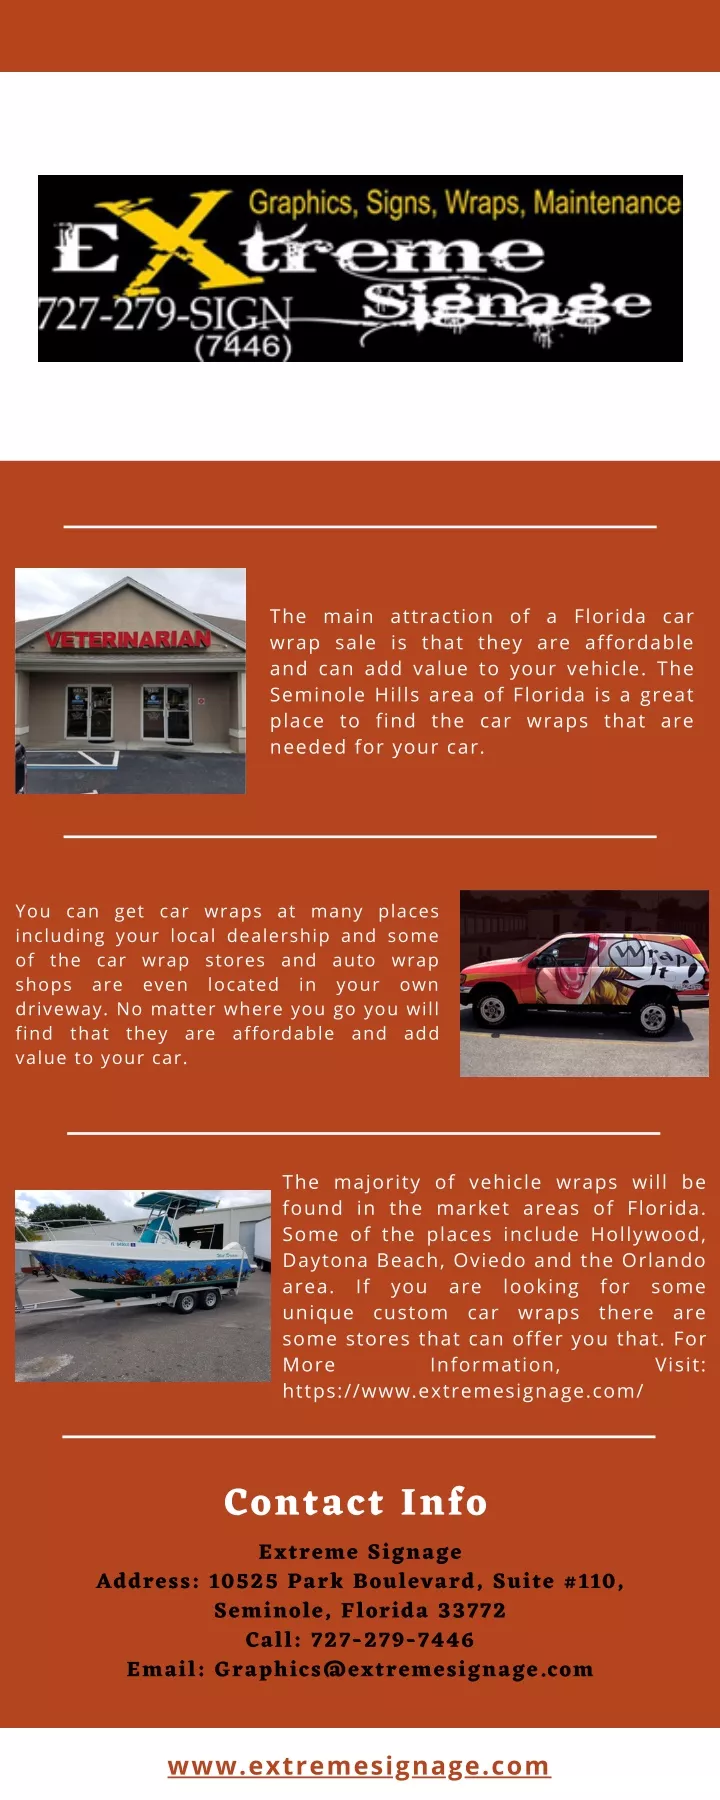 the main attraction of a florida car wrap sale